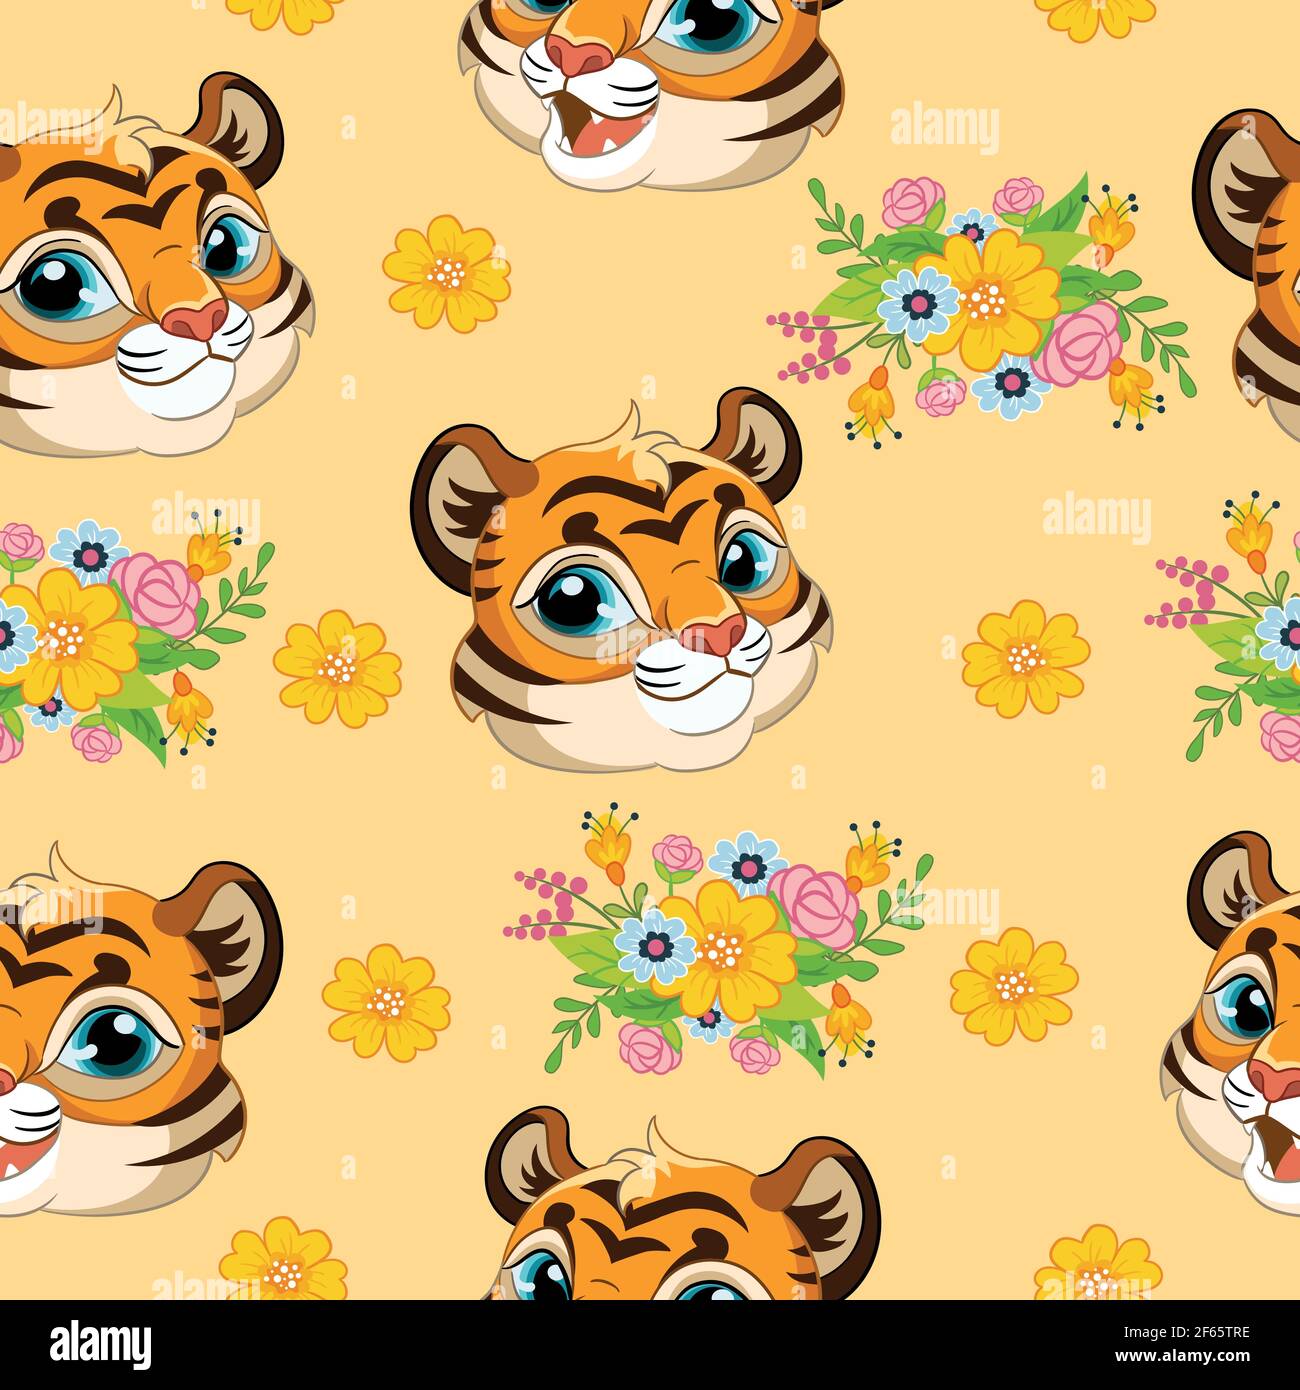 Seamless pattern with cute tigers heads and flowers on orange background. Vector illustration for party, print, baby shower, wallpaper, design, decor, Stock Vector